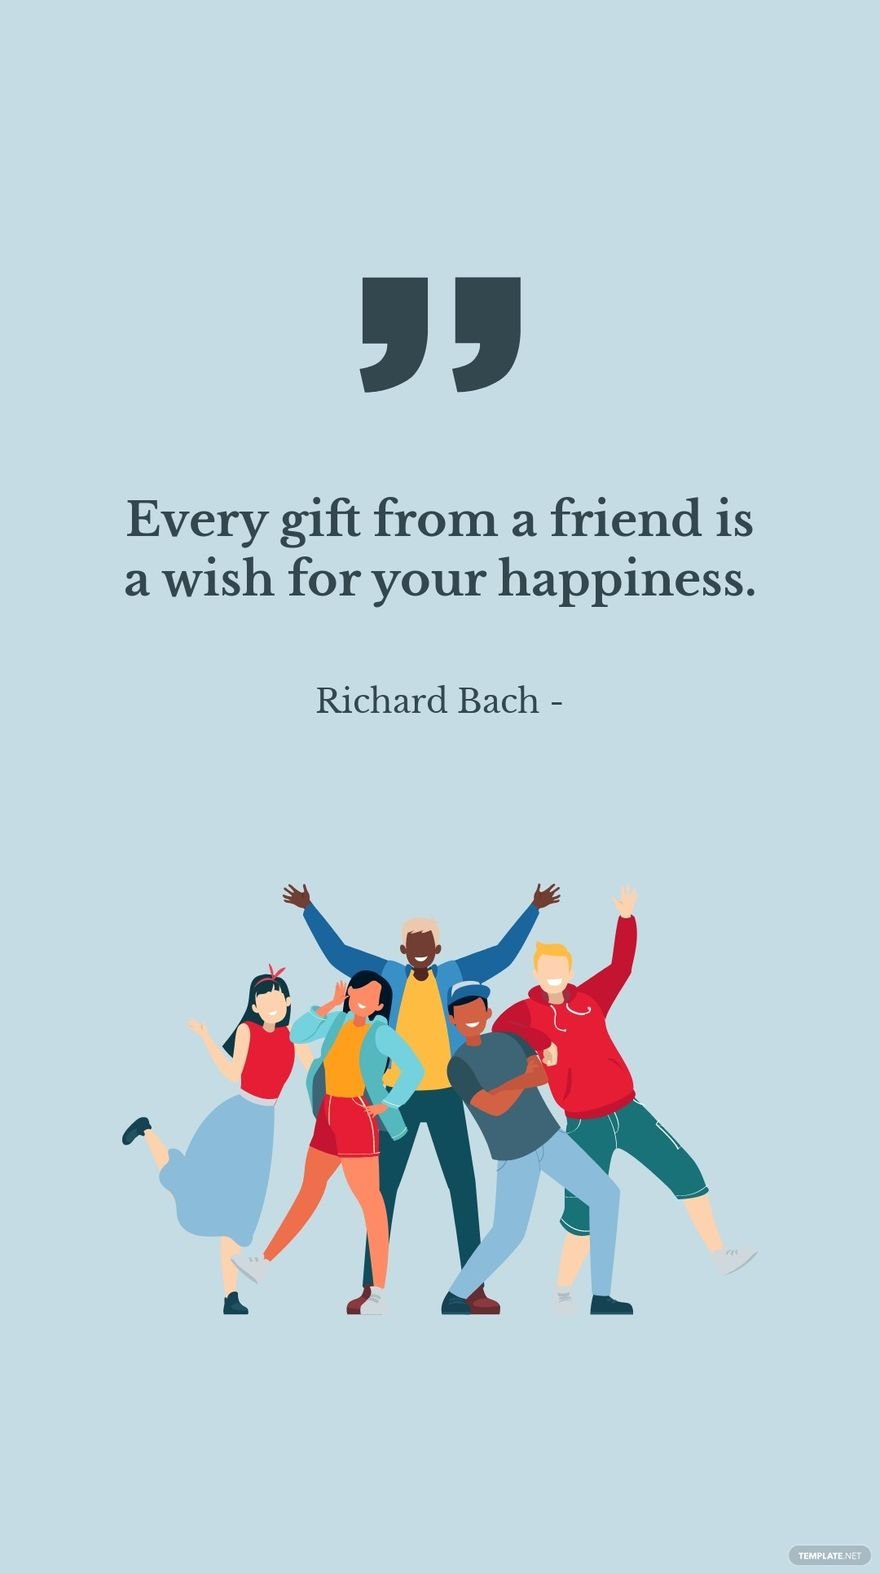 Richard Bach - Every gift from a friend is a wish for your happiness. in JPG